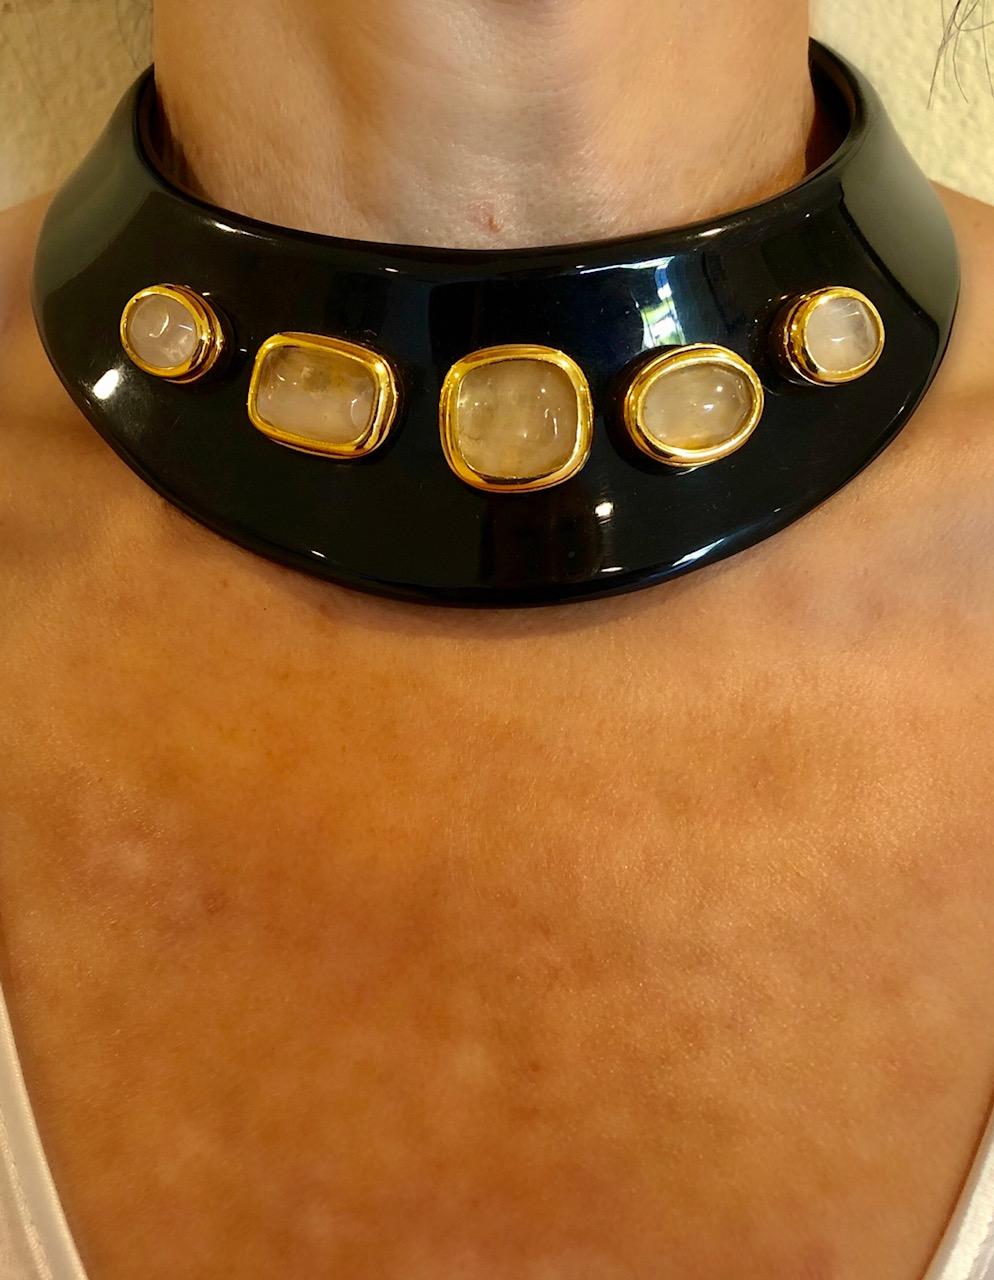 Chic, modern and sleek vintage statement necklace comprised out of black galalith (resin) by French House Goossens. The bold necklace is accented by five large polished geometric rock crystal cabochons mounted on a gold-tone base.  The necklace was